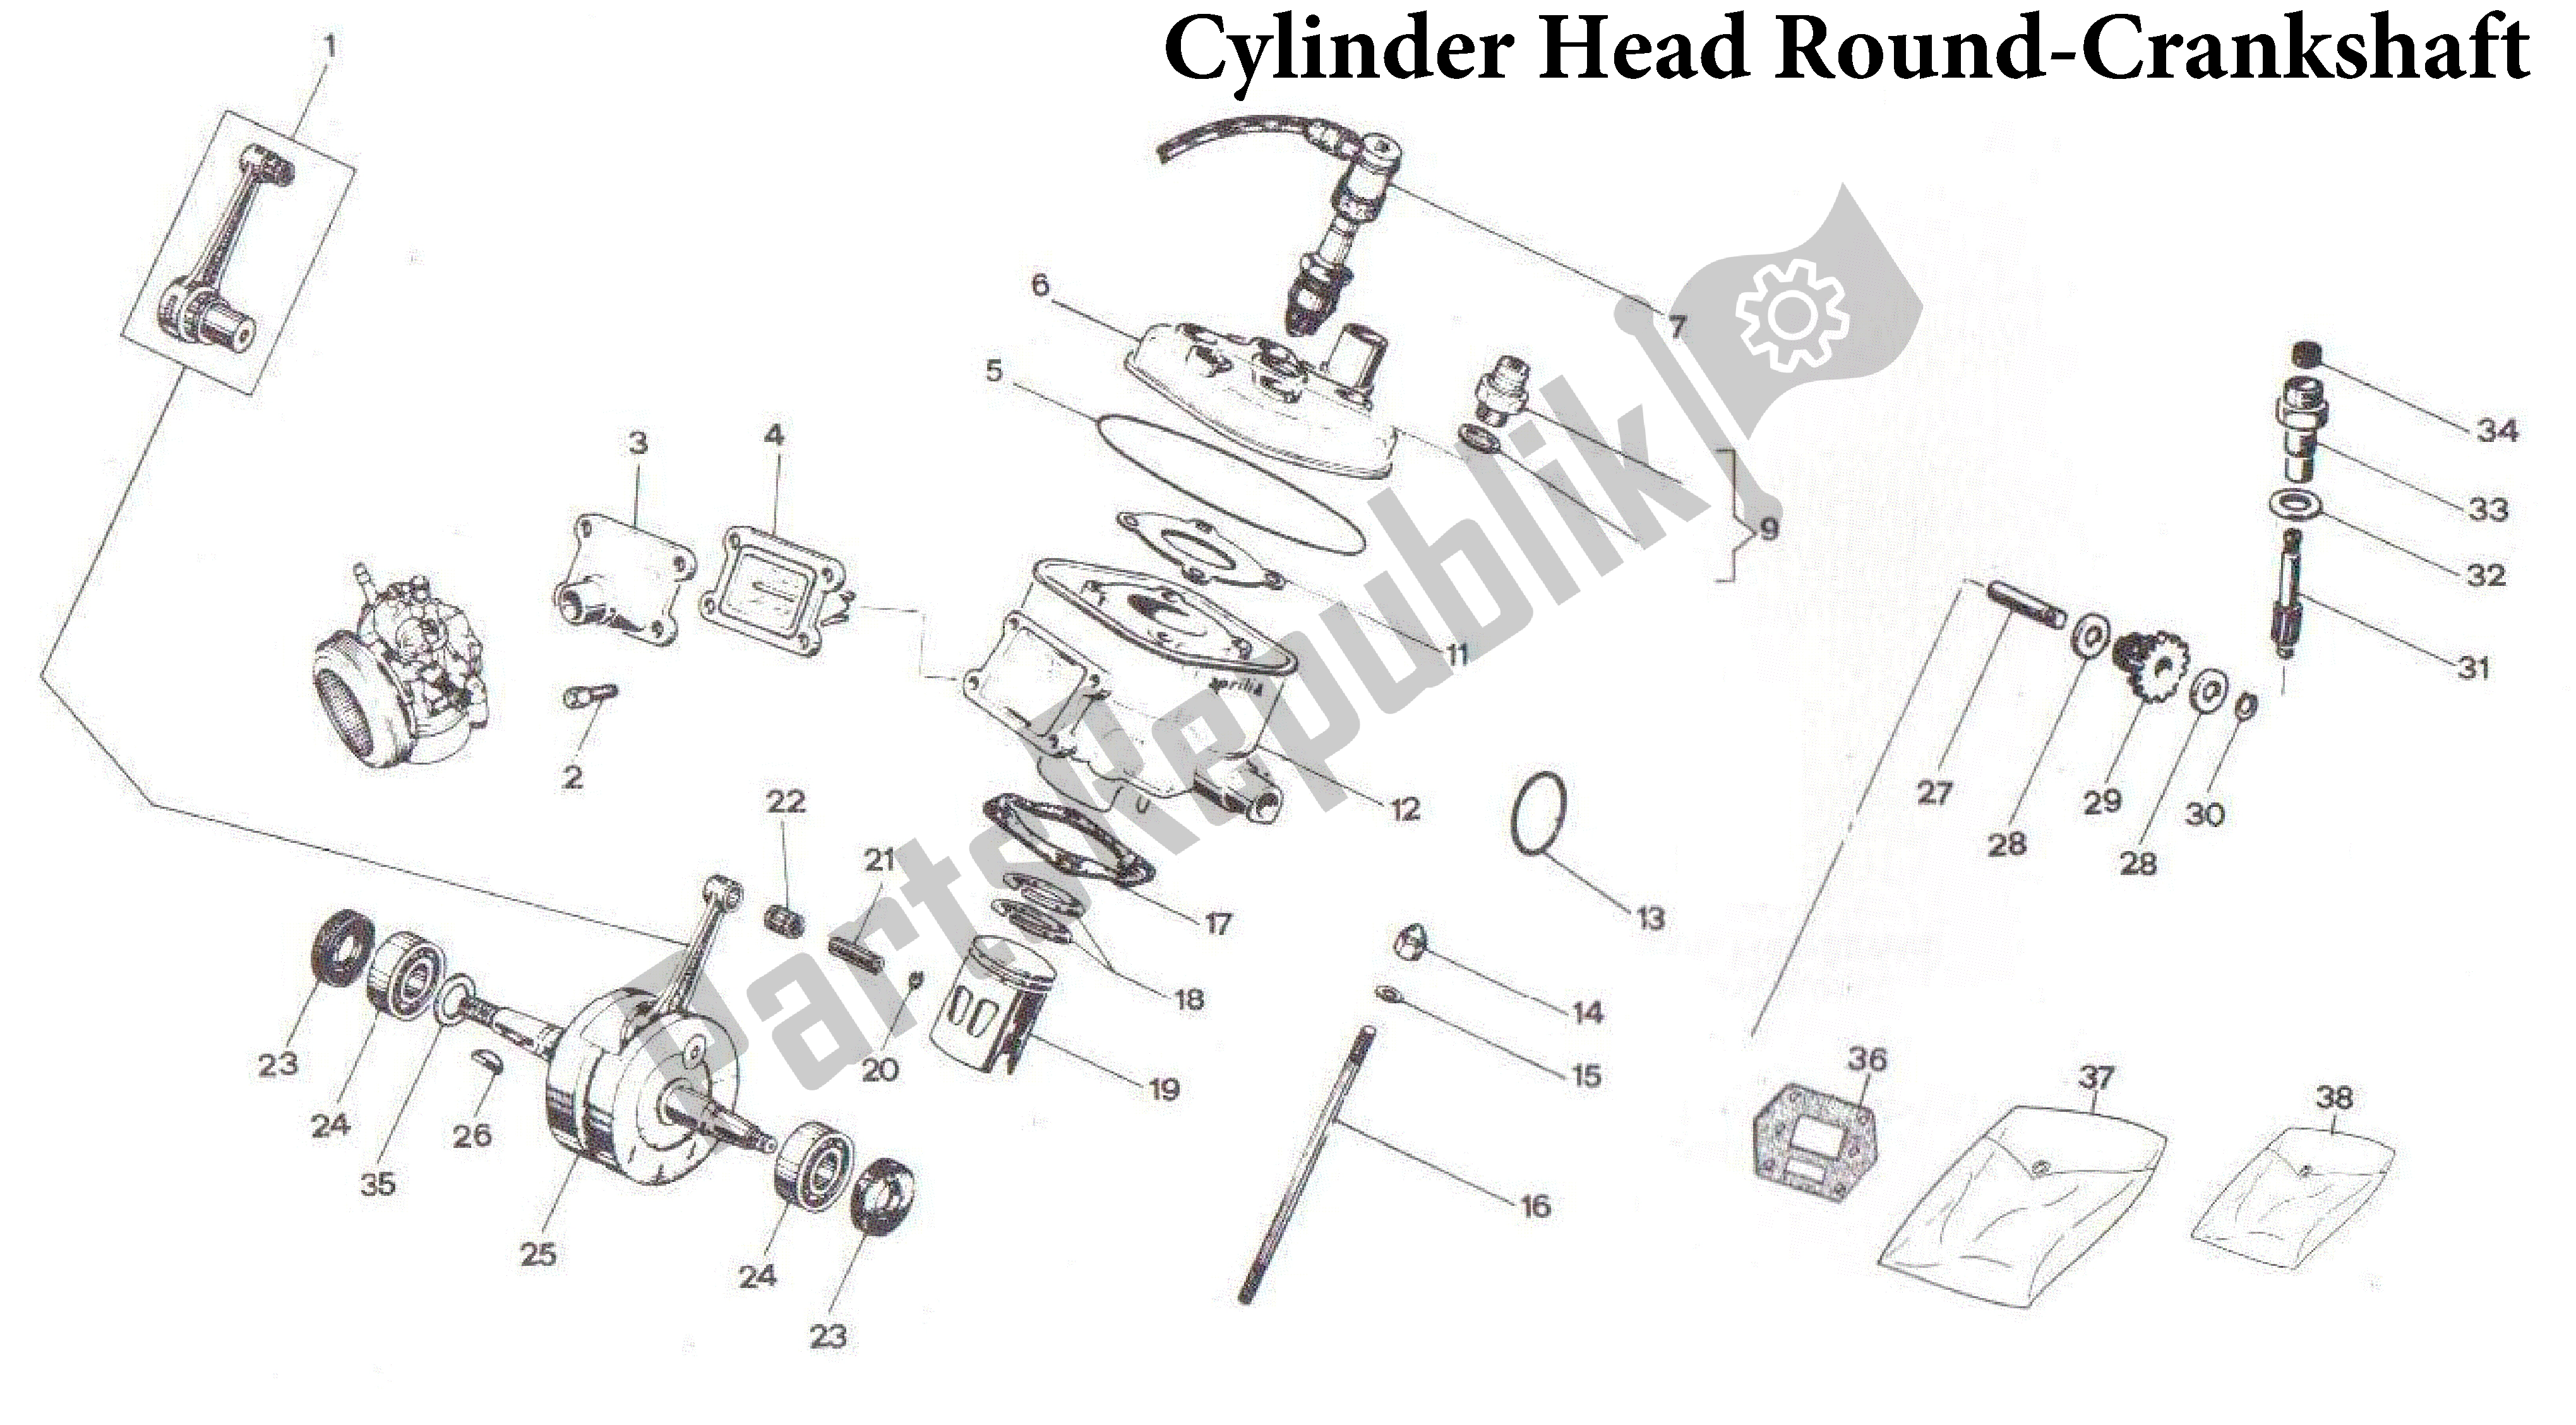 All parts for the Cylinder Head Round-crankshaft of the Aprilia Pegaso 50 1992